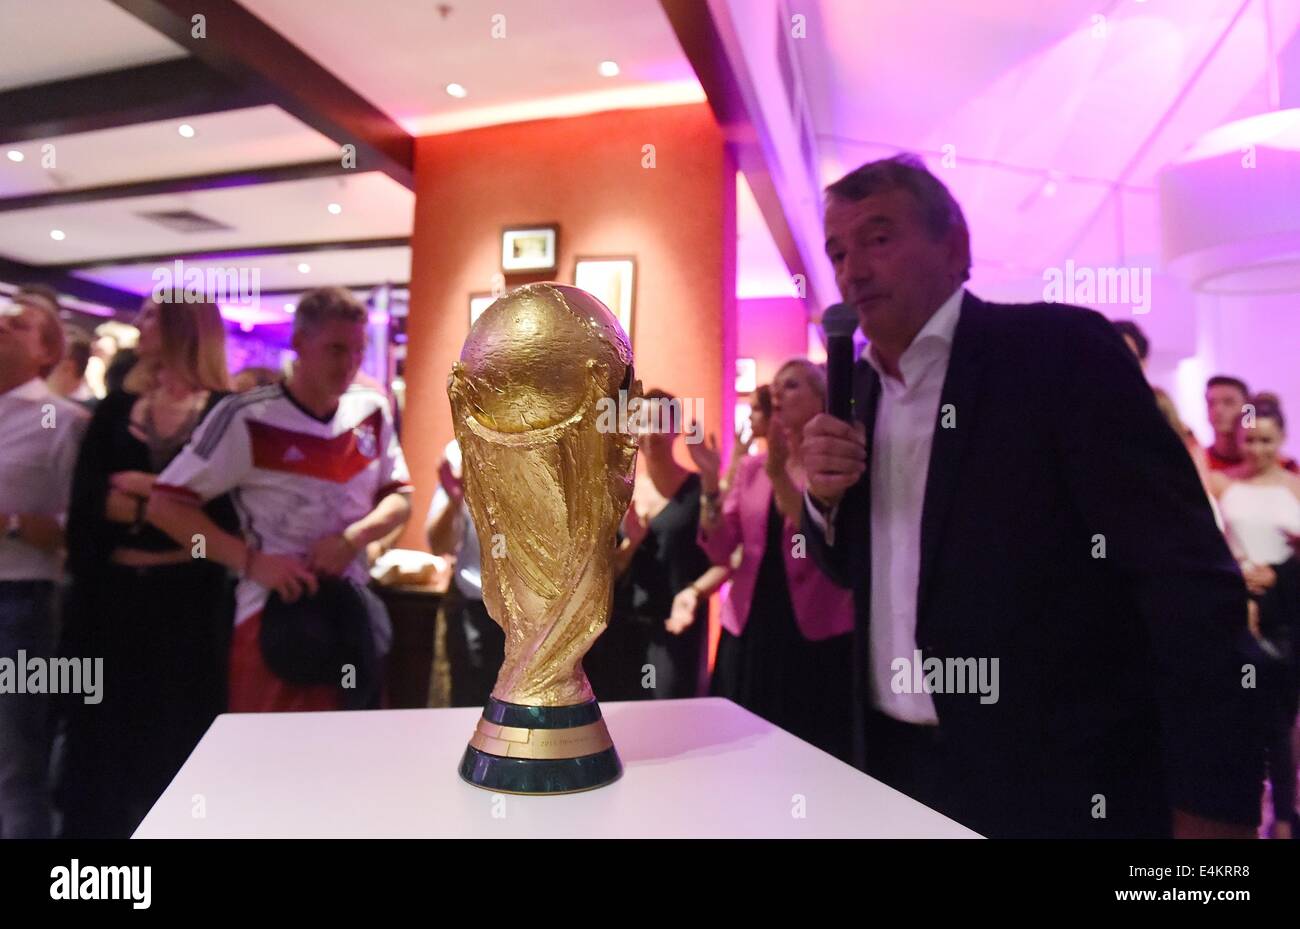 Handout: Rio de Janeiro, Brazil. 14th July, 2014. World Cup trophy on a table during a speech by DFB President Wolfgang Niersbach. The German team celebrated Germany's victory over Argentina in the Soccer World Cup with the trophy at Hotel Sheraton in Rio De Janeiro, Brazil on 13 July 2014. Germany won the World Cup 1-0 after defeating Argentina. (: Image for in connection with the current reporting on the World Cup and together with the source: Photo: Markus Gilliar/DFB/dpa.) Credit:  dpa picture alliance/Alamy Live News Stock Photo